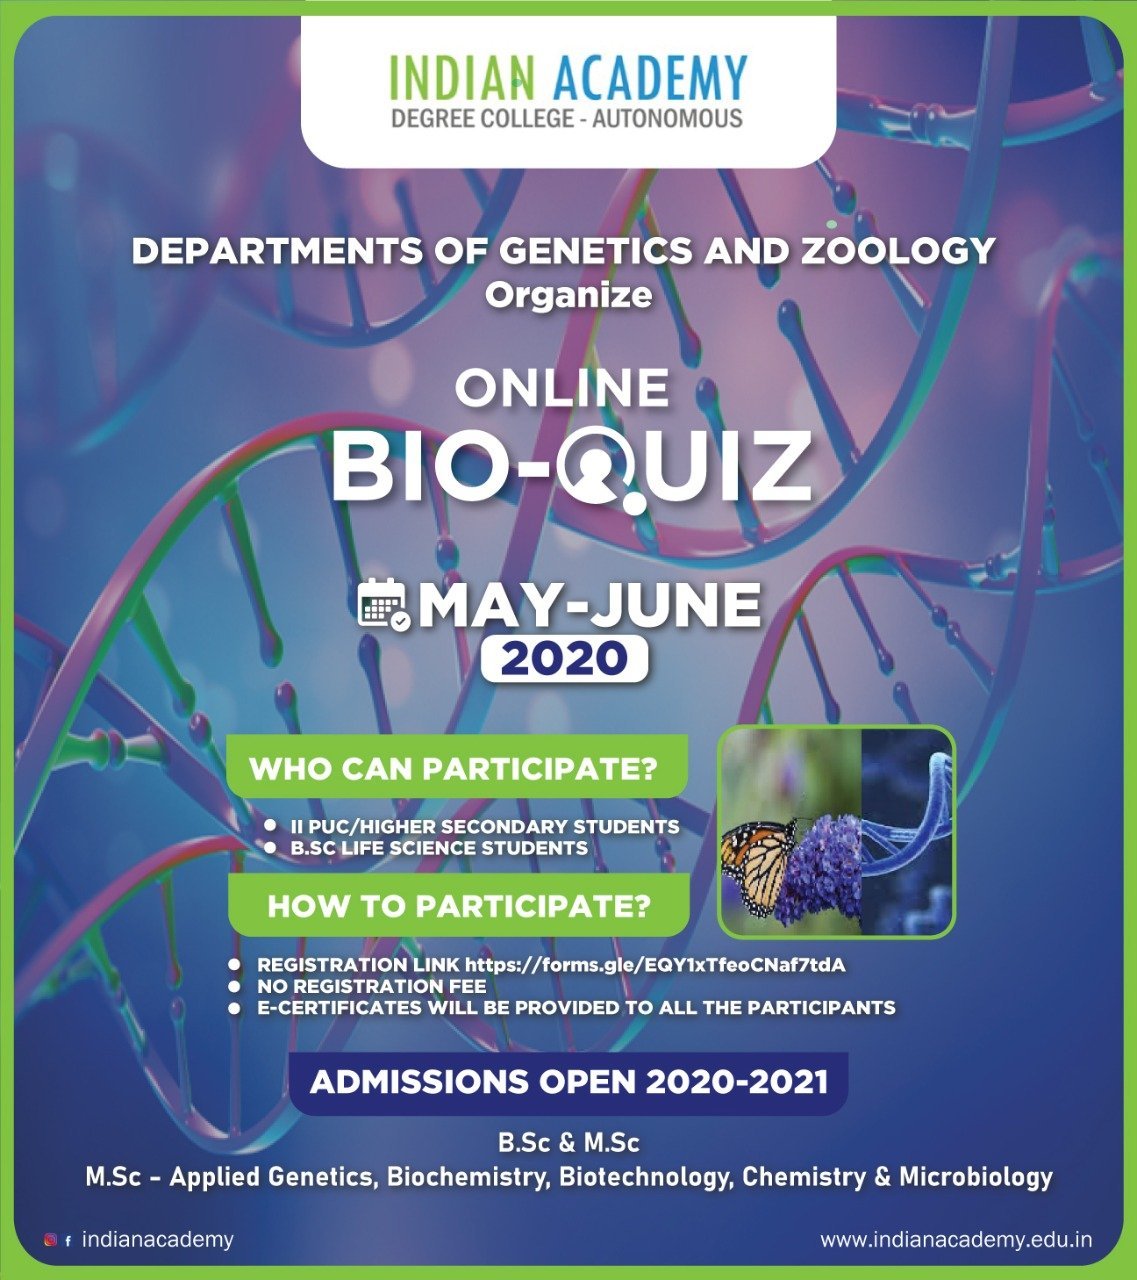 Departments of Genetics and Zoology welcome you to participate online BIO-QUIZ , May - June 2020 at Indian Academy Degree College-Autonomous , Bangalore.